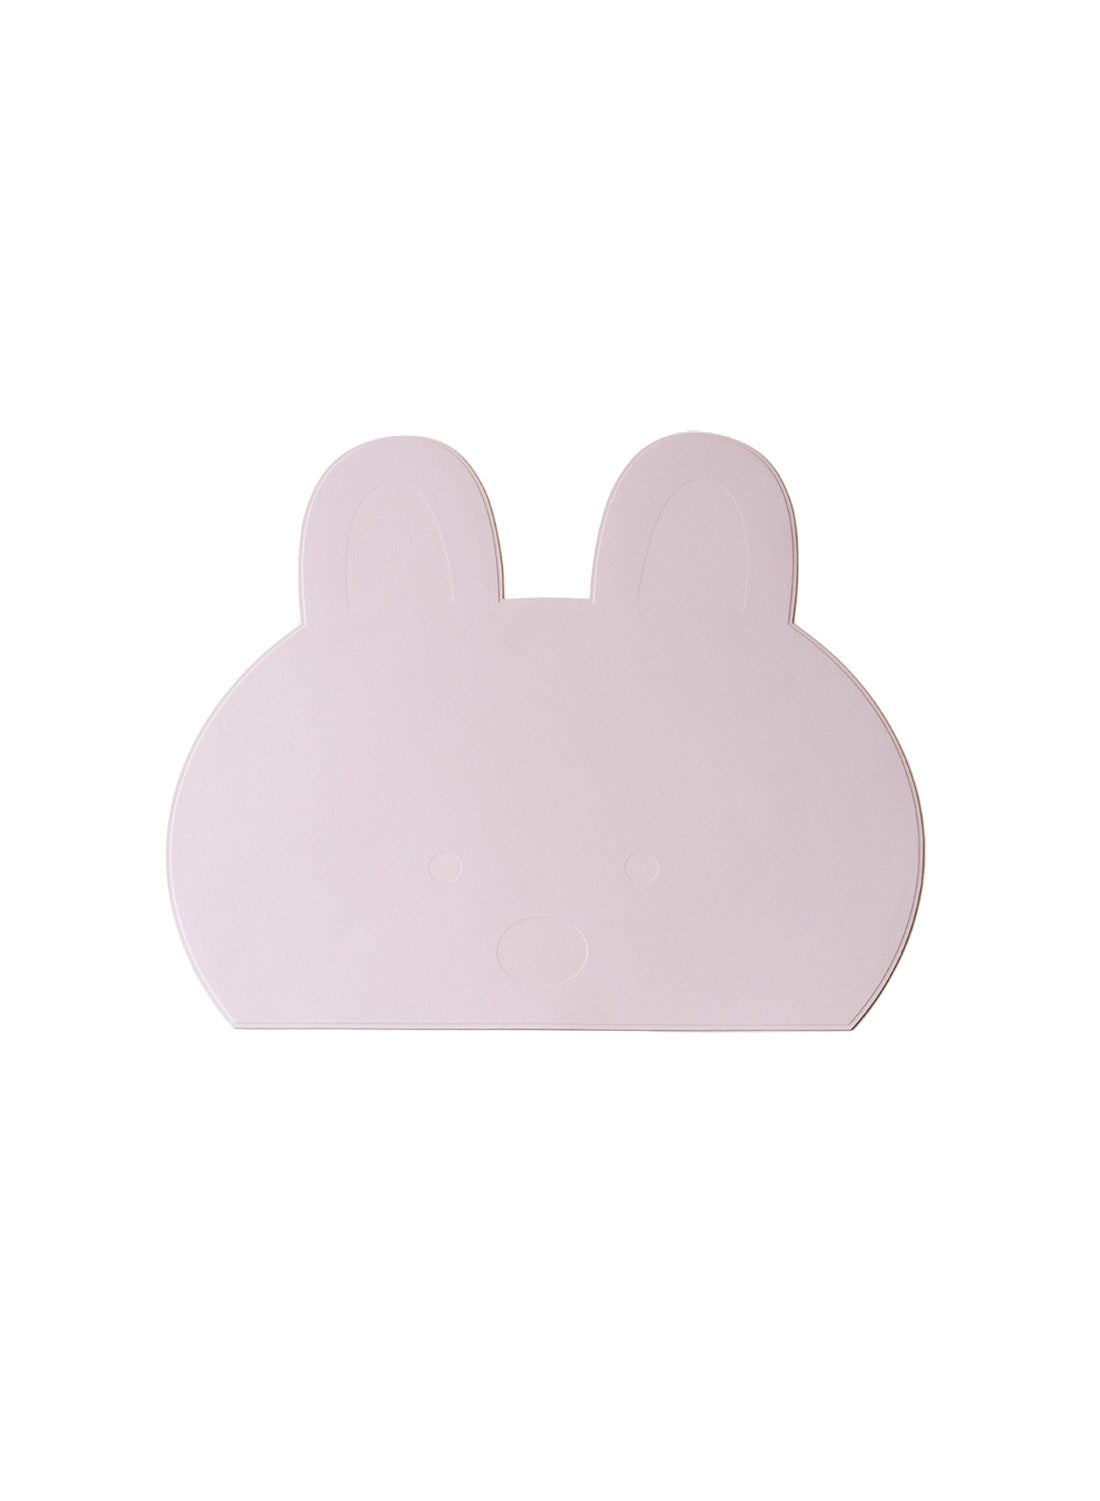 Fenice Animal Placemat, Bunny